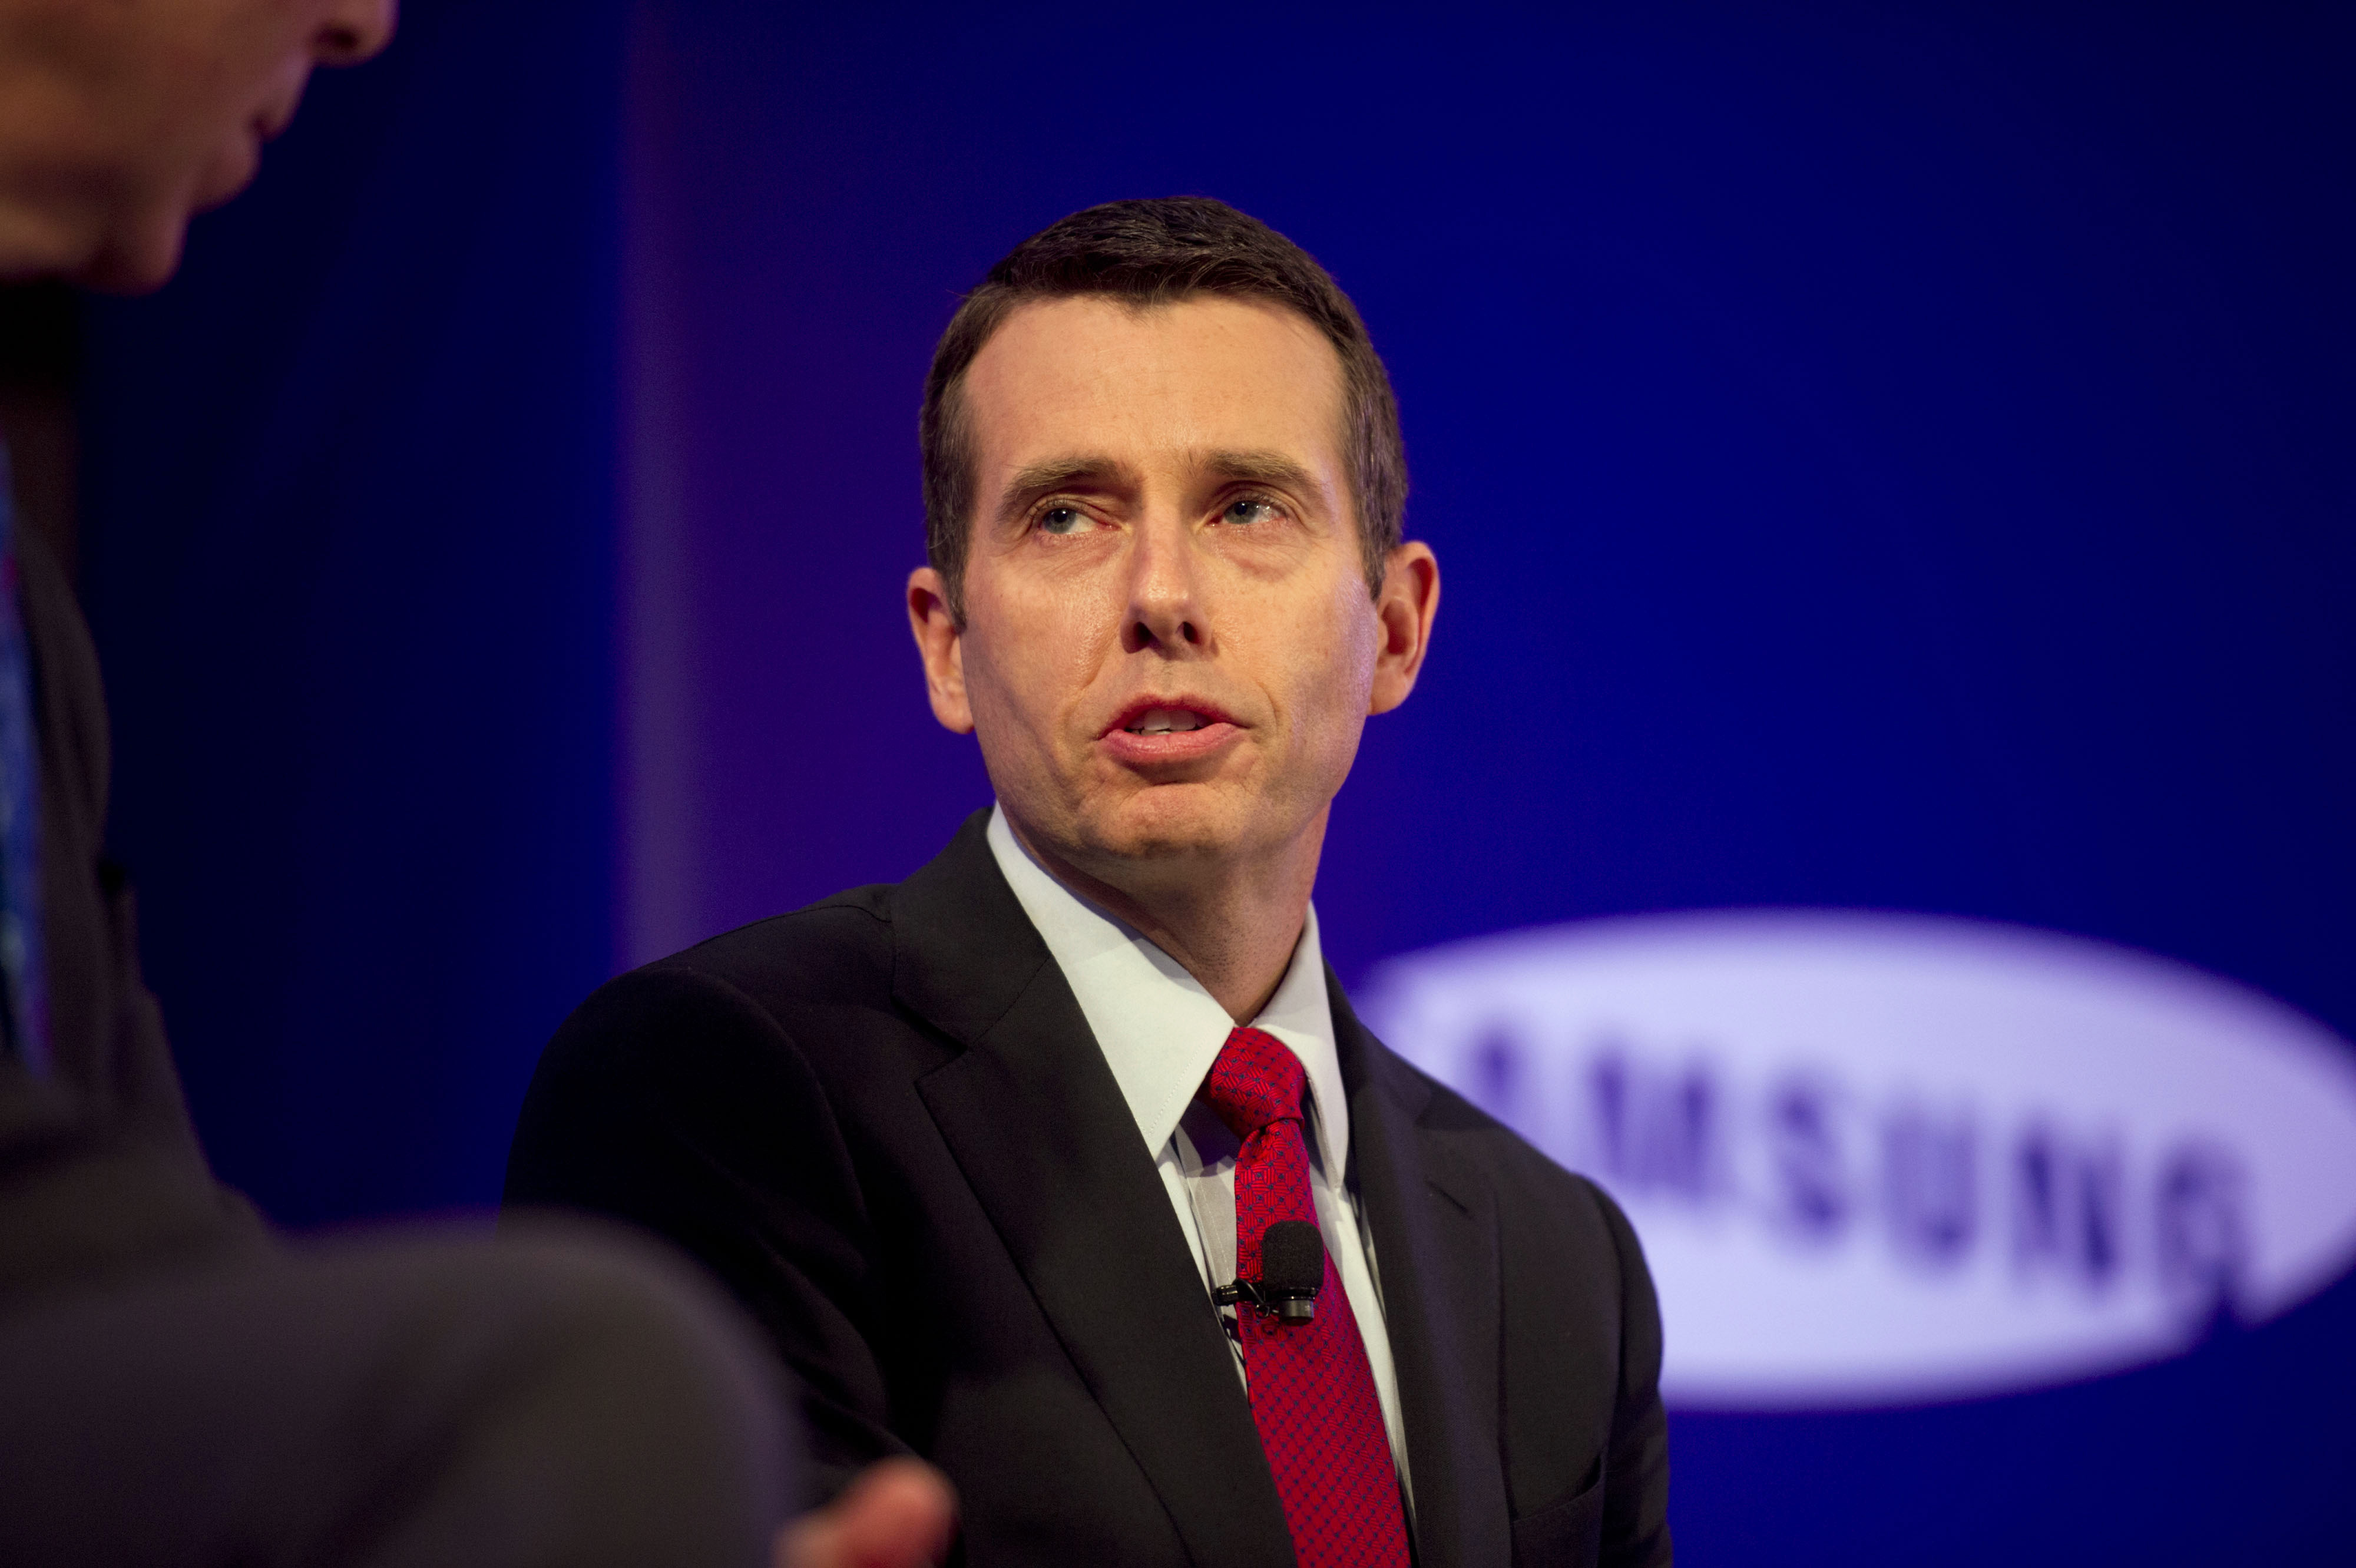 David Plouffe, former senior adviser to U.S. President Barack Obama and Bloomberg News analyst, speaks at the Bloomberg Year Ahead: 2014 conference in Chicago, Illinois, U.S., on Nov. 20, 2013. (Bloomberg—Bloomberg /Getty Images)